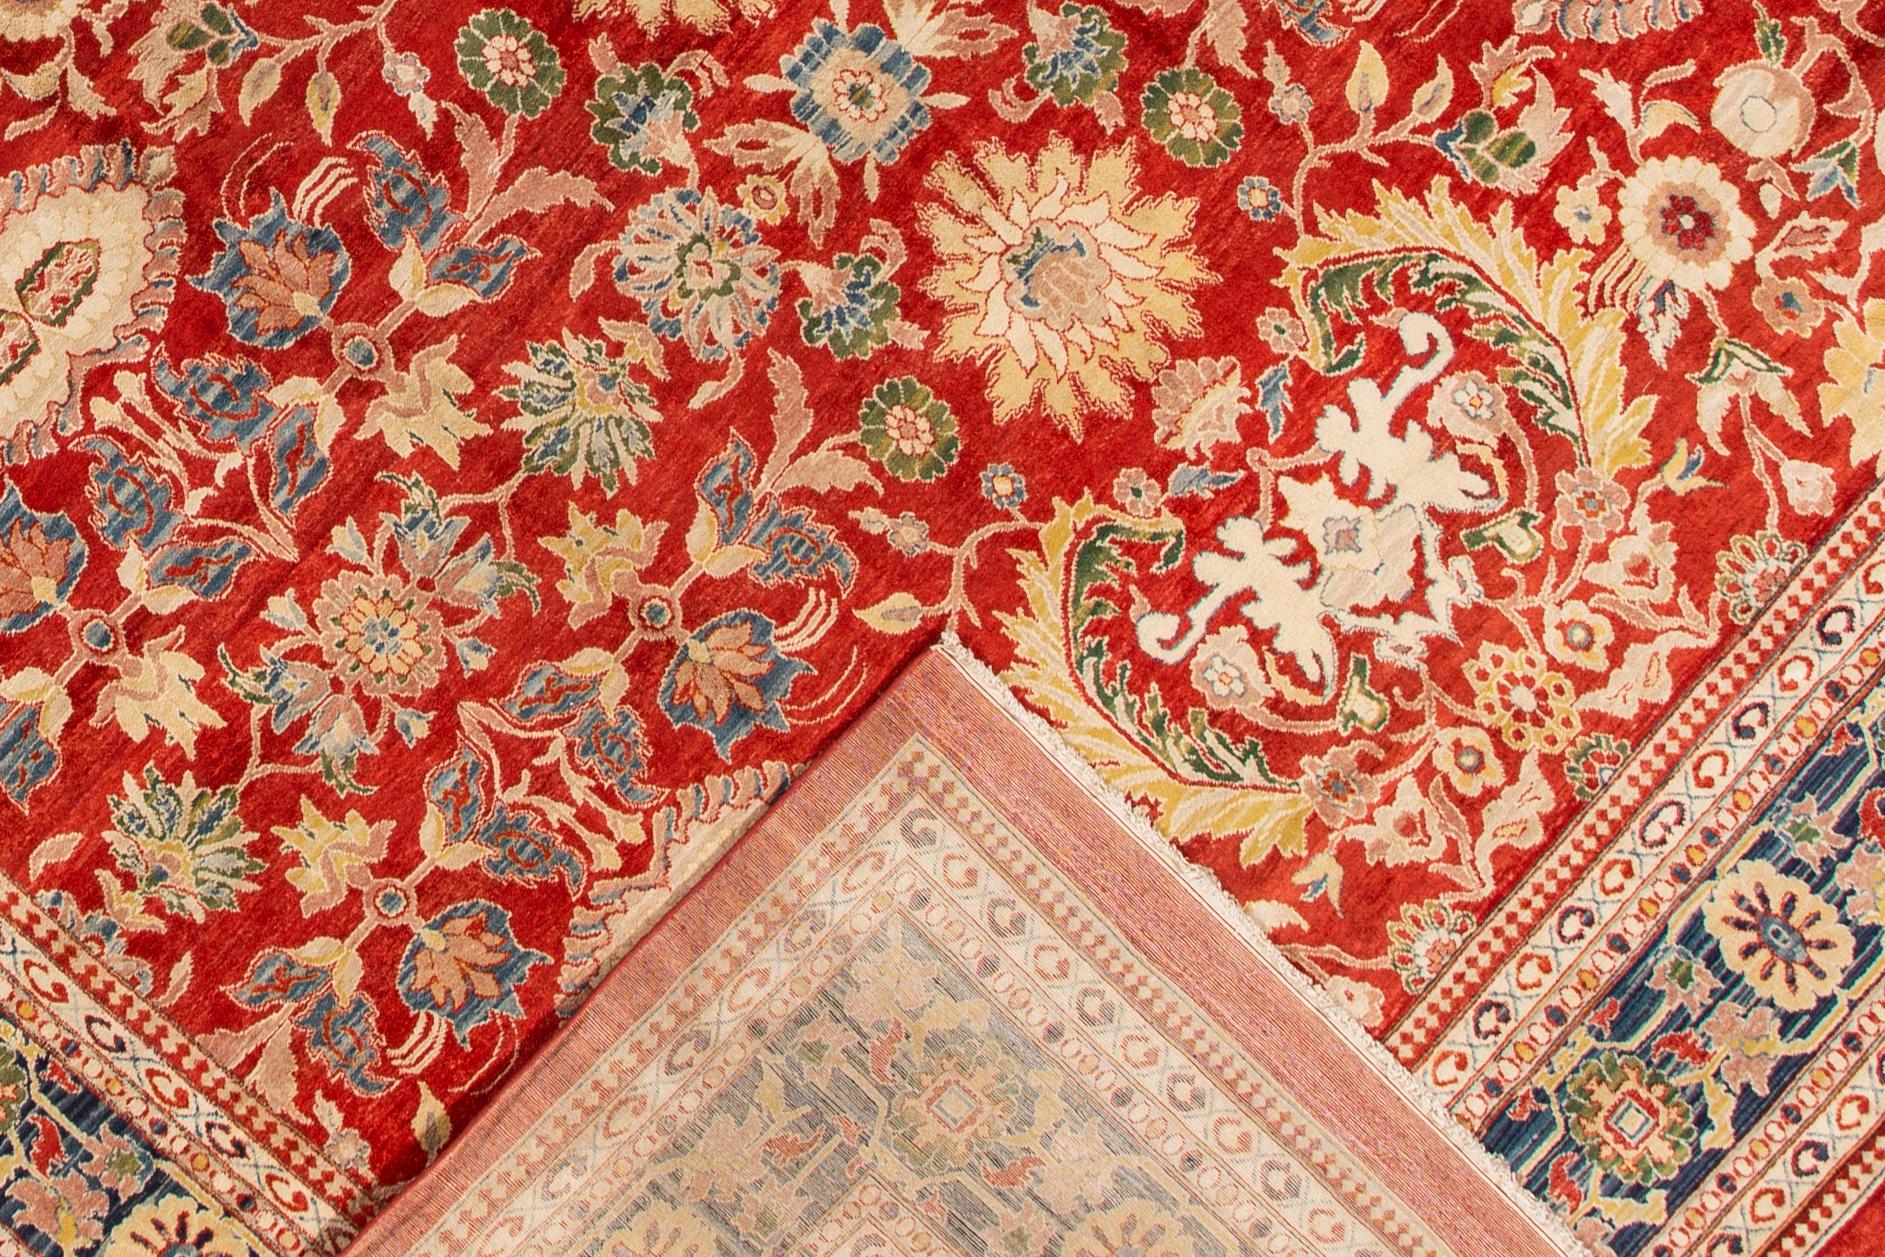 A hand-knotted antique Sultanabad rug with an all-over floral design. This rug measures 14'0